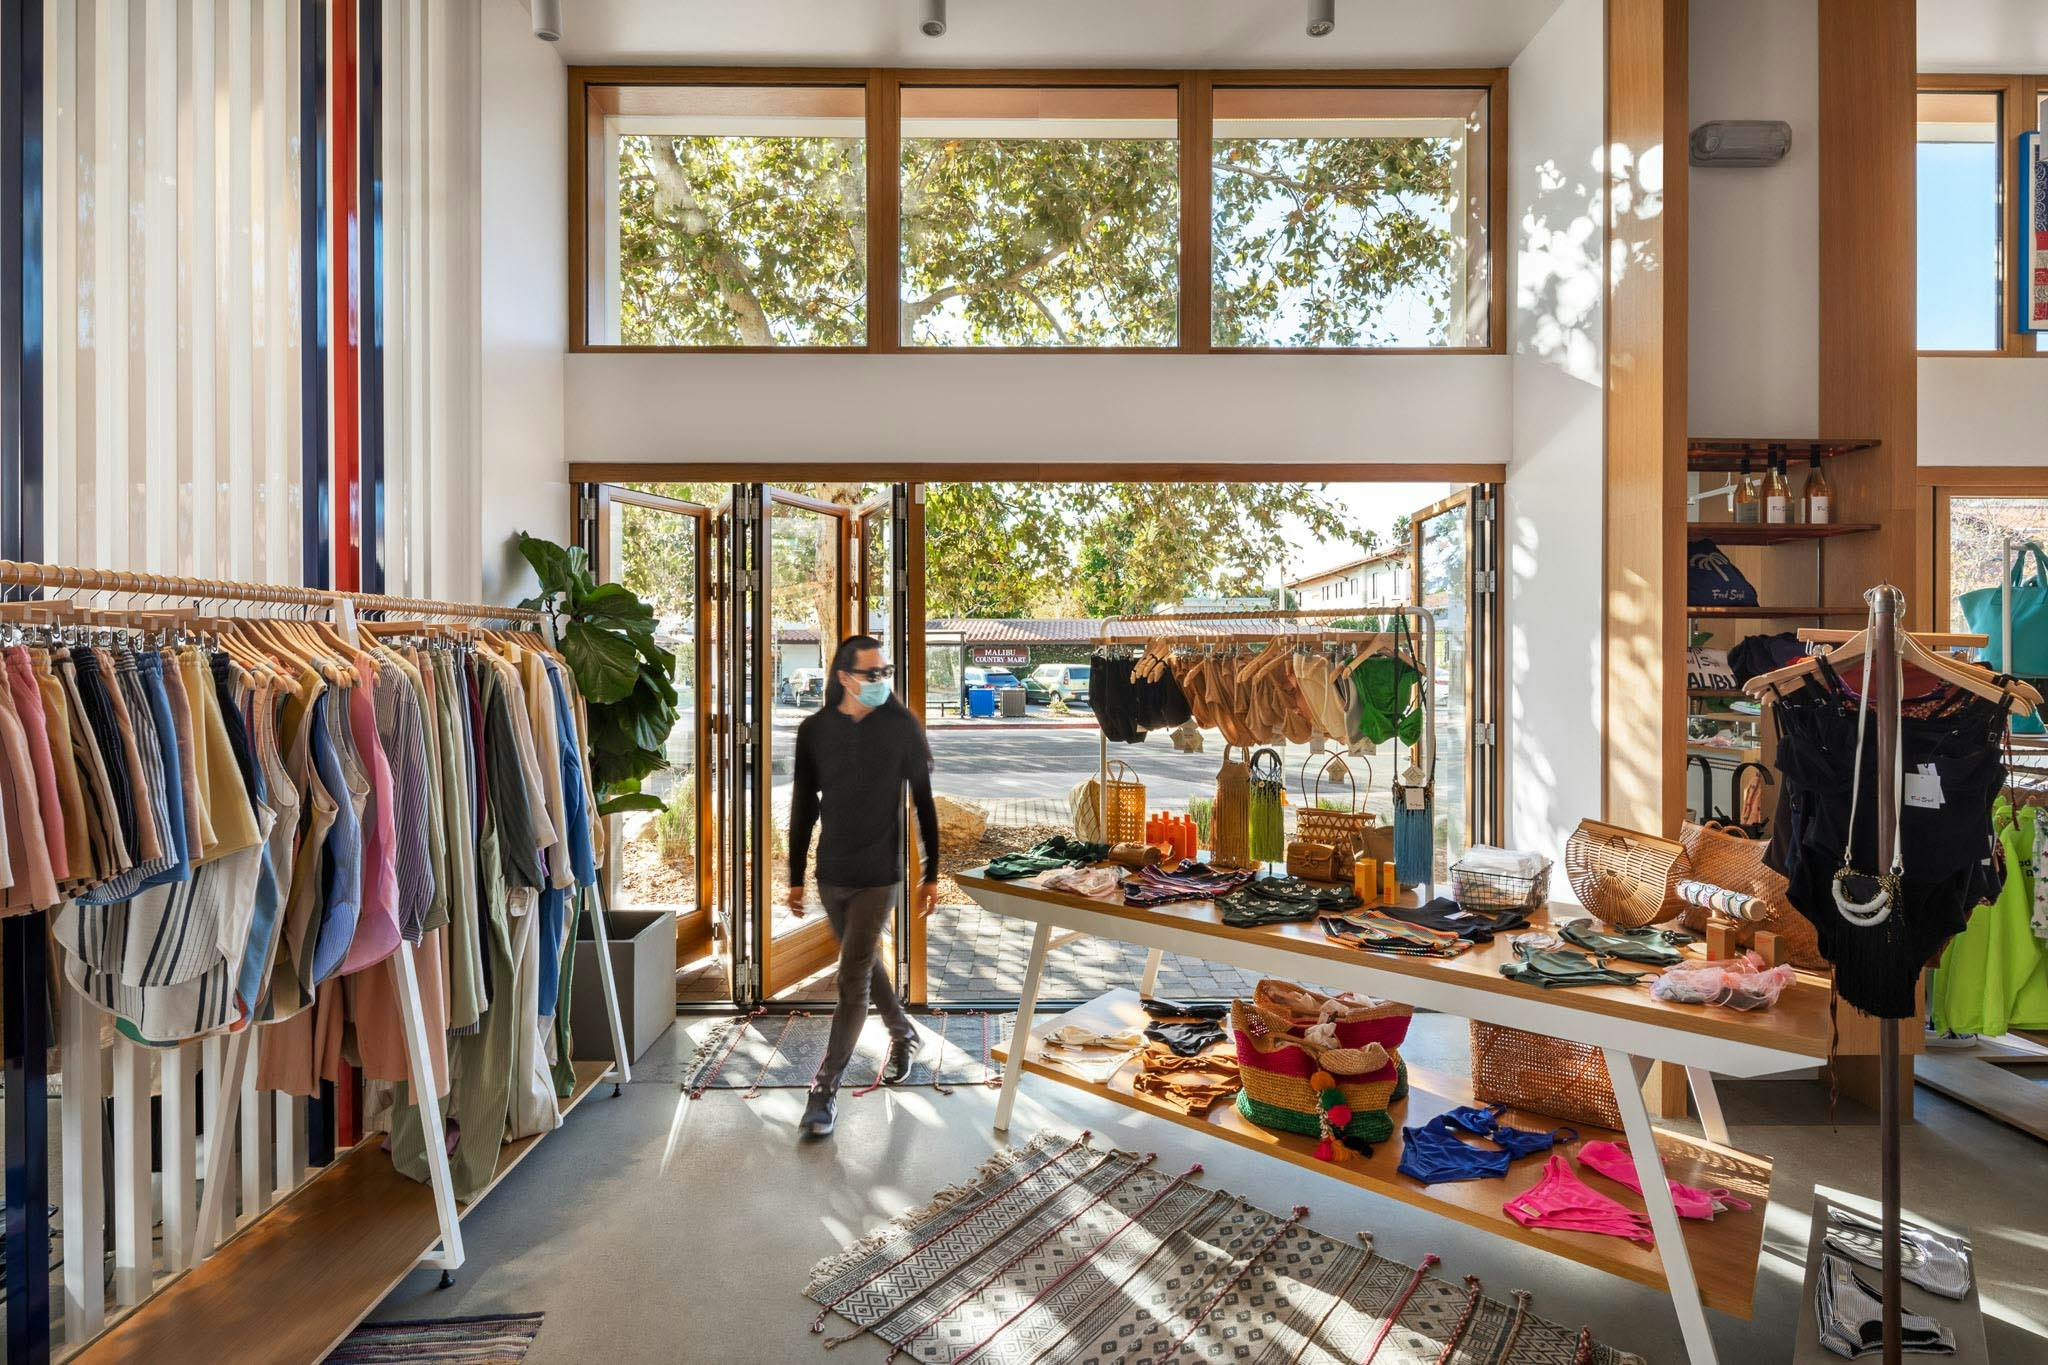 moveable glass storefront in wood